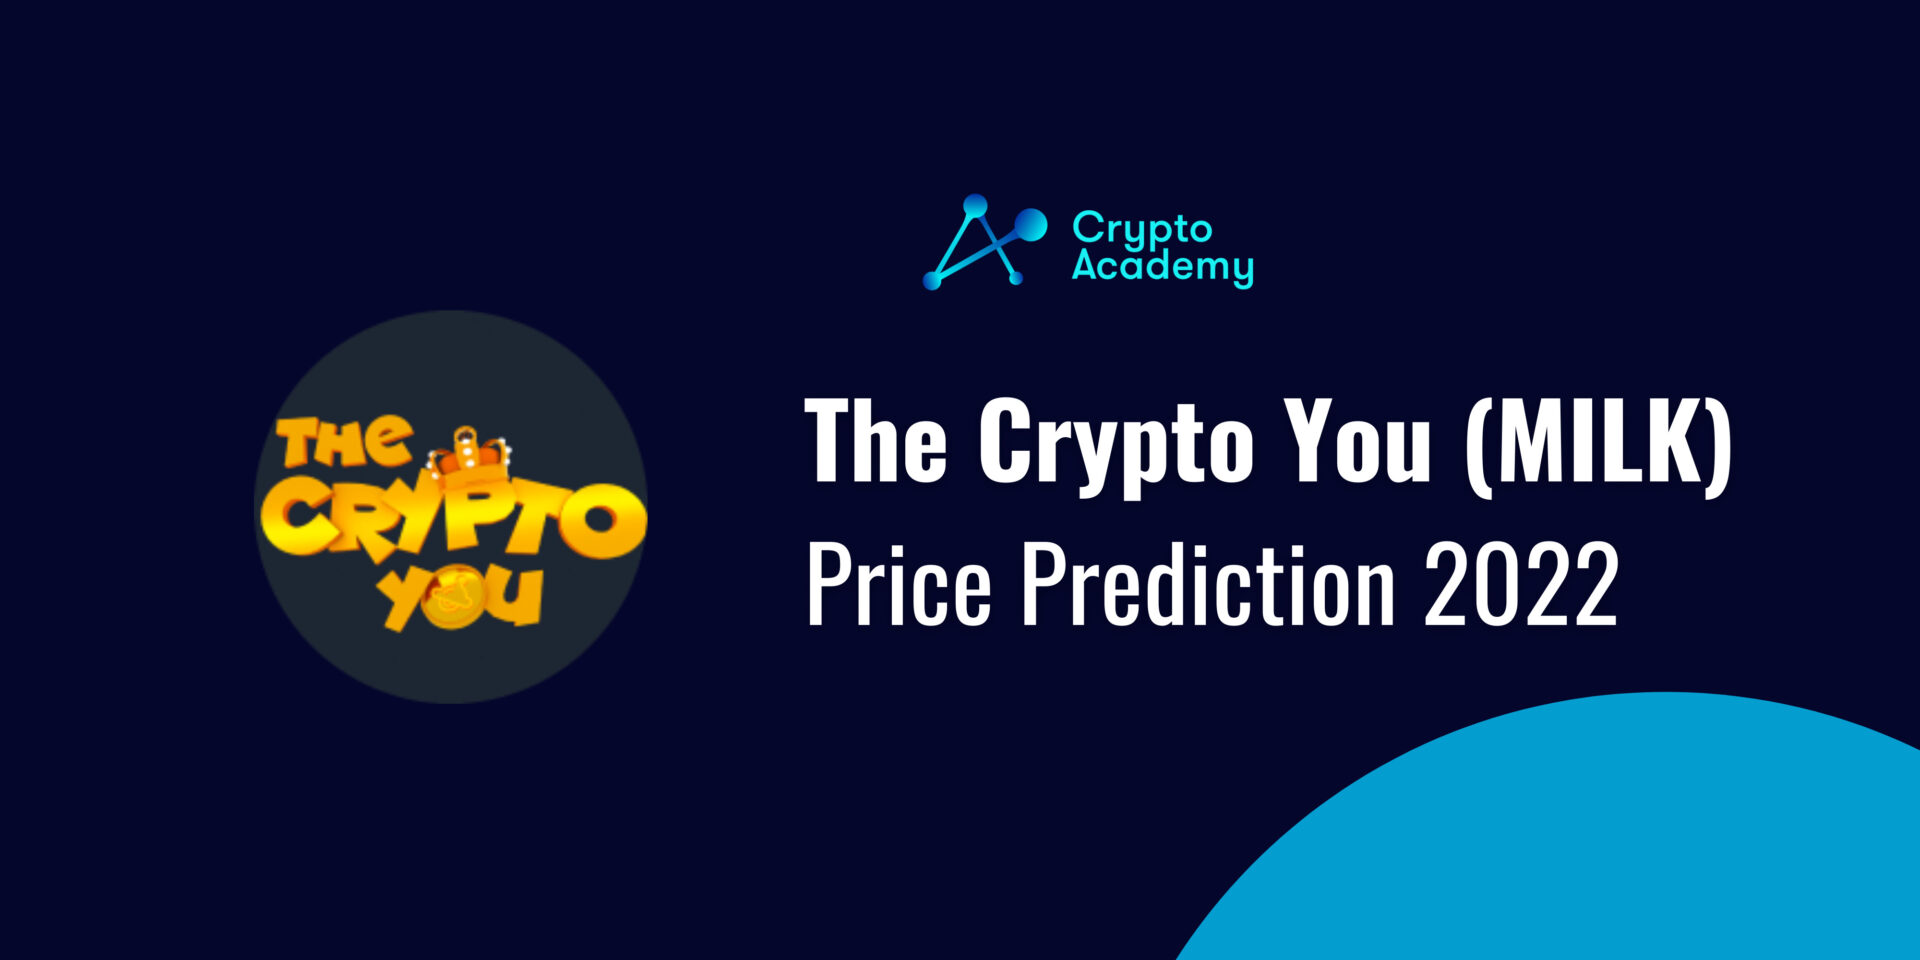 The Crypto You (Milk) Price Prediction 2022 and Beyond - Will MILK reach $1?